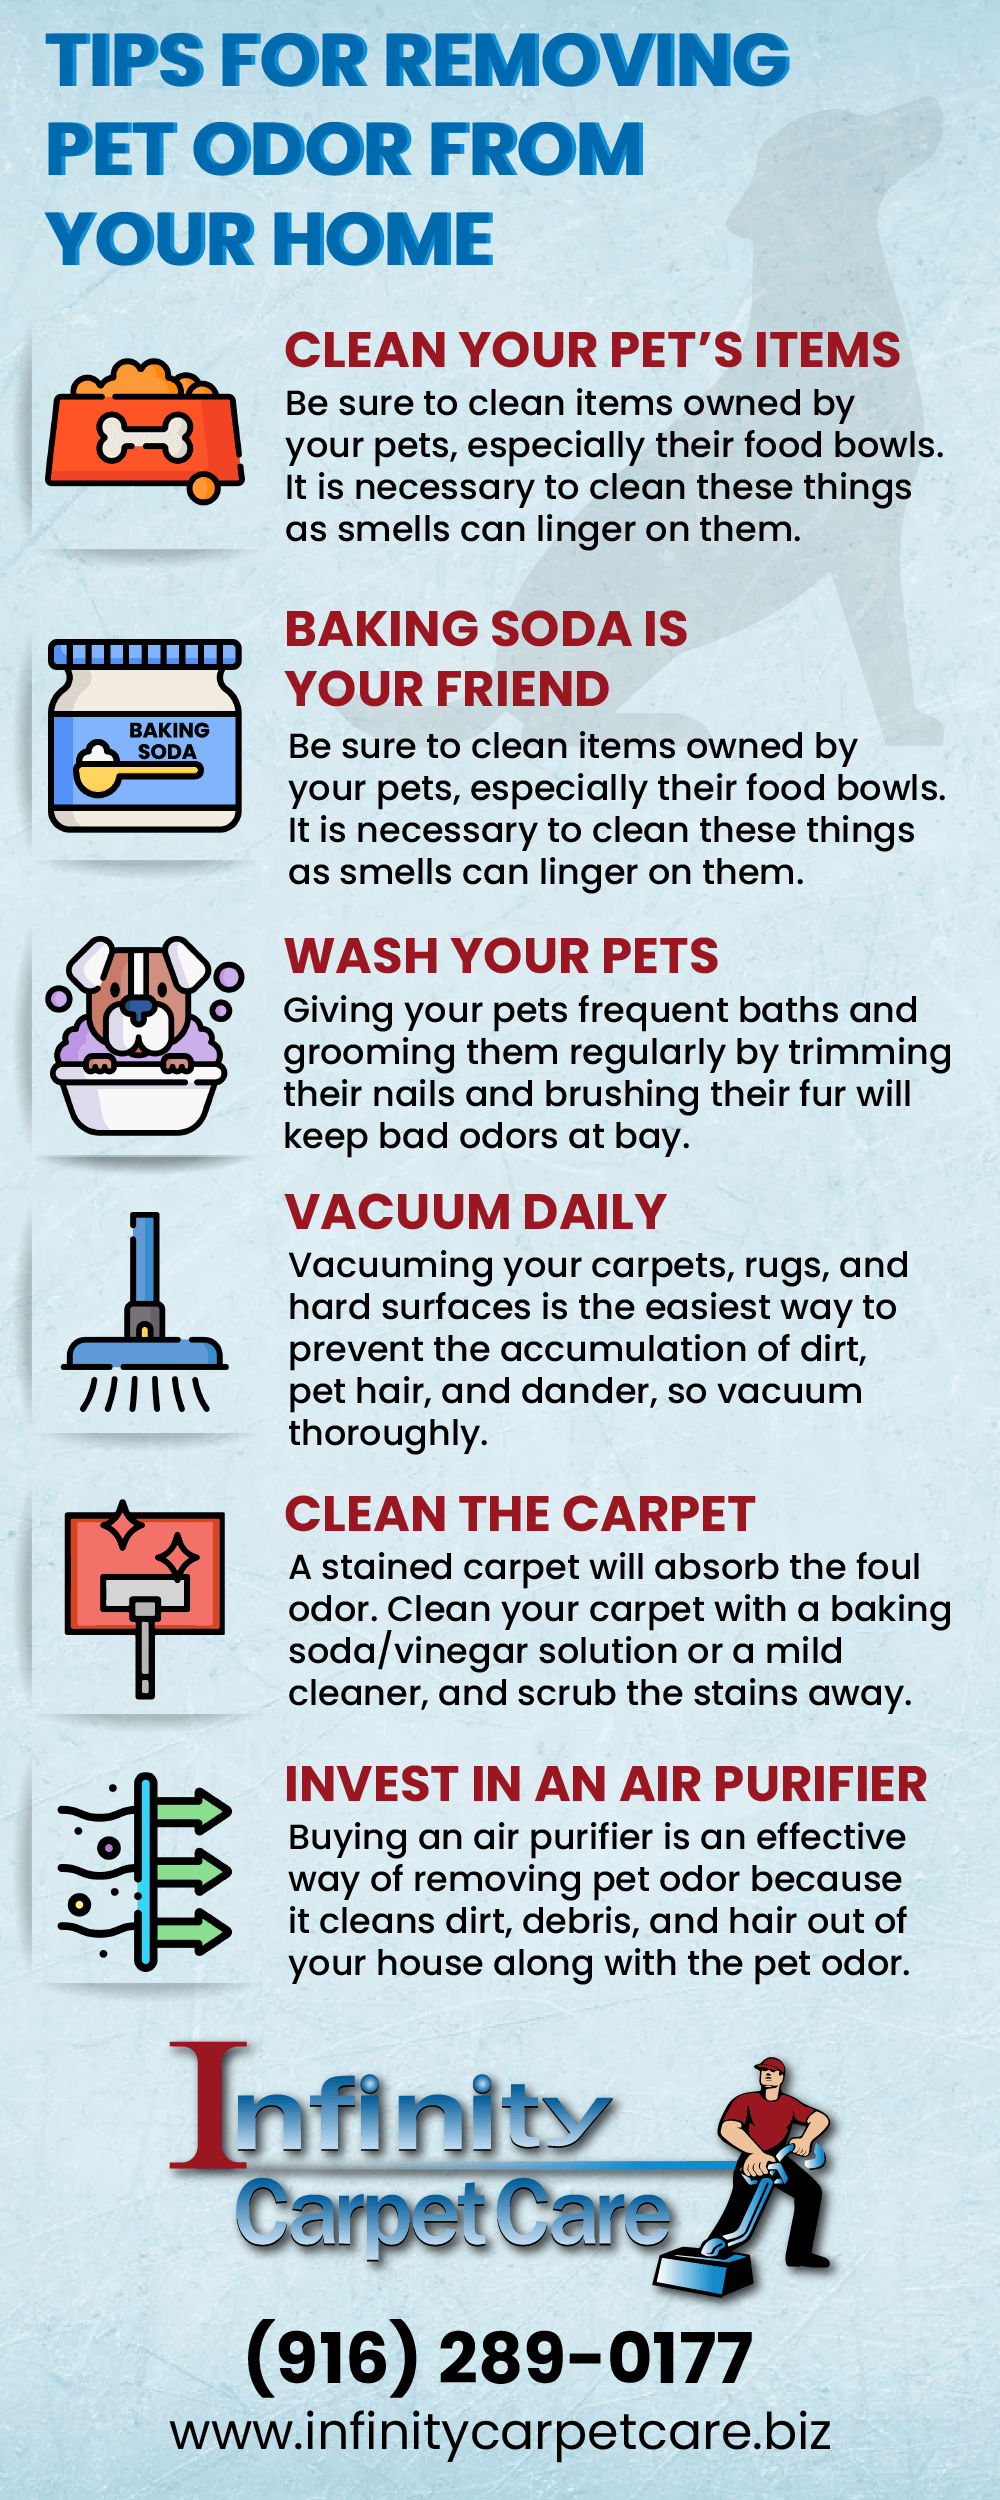 Tips For Removing Pet Odor From Your Home